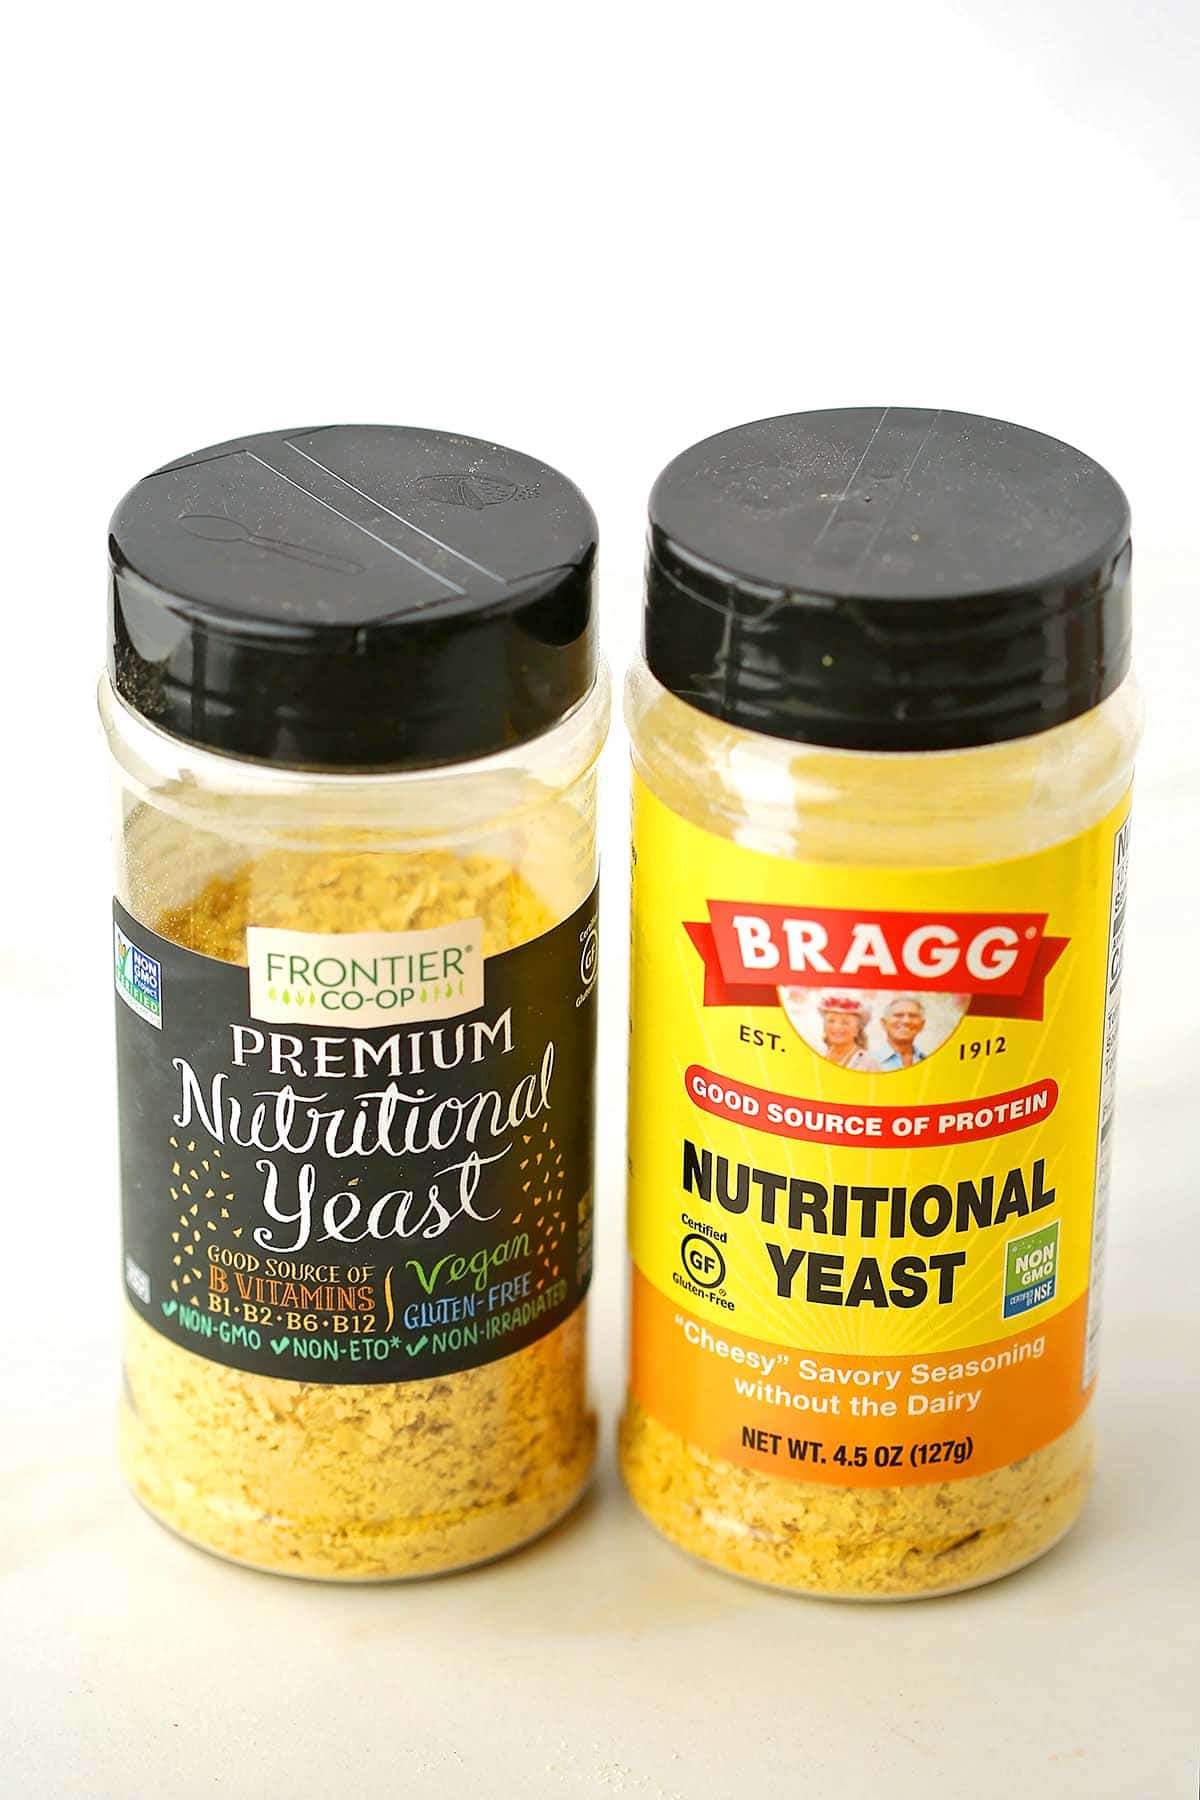 Close up image of the two containers of different brand of nutritional yeast. 